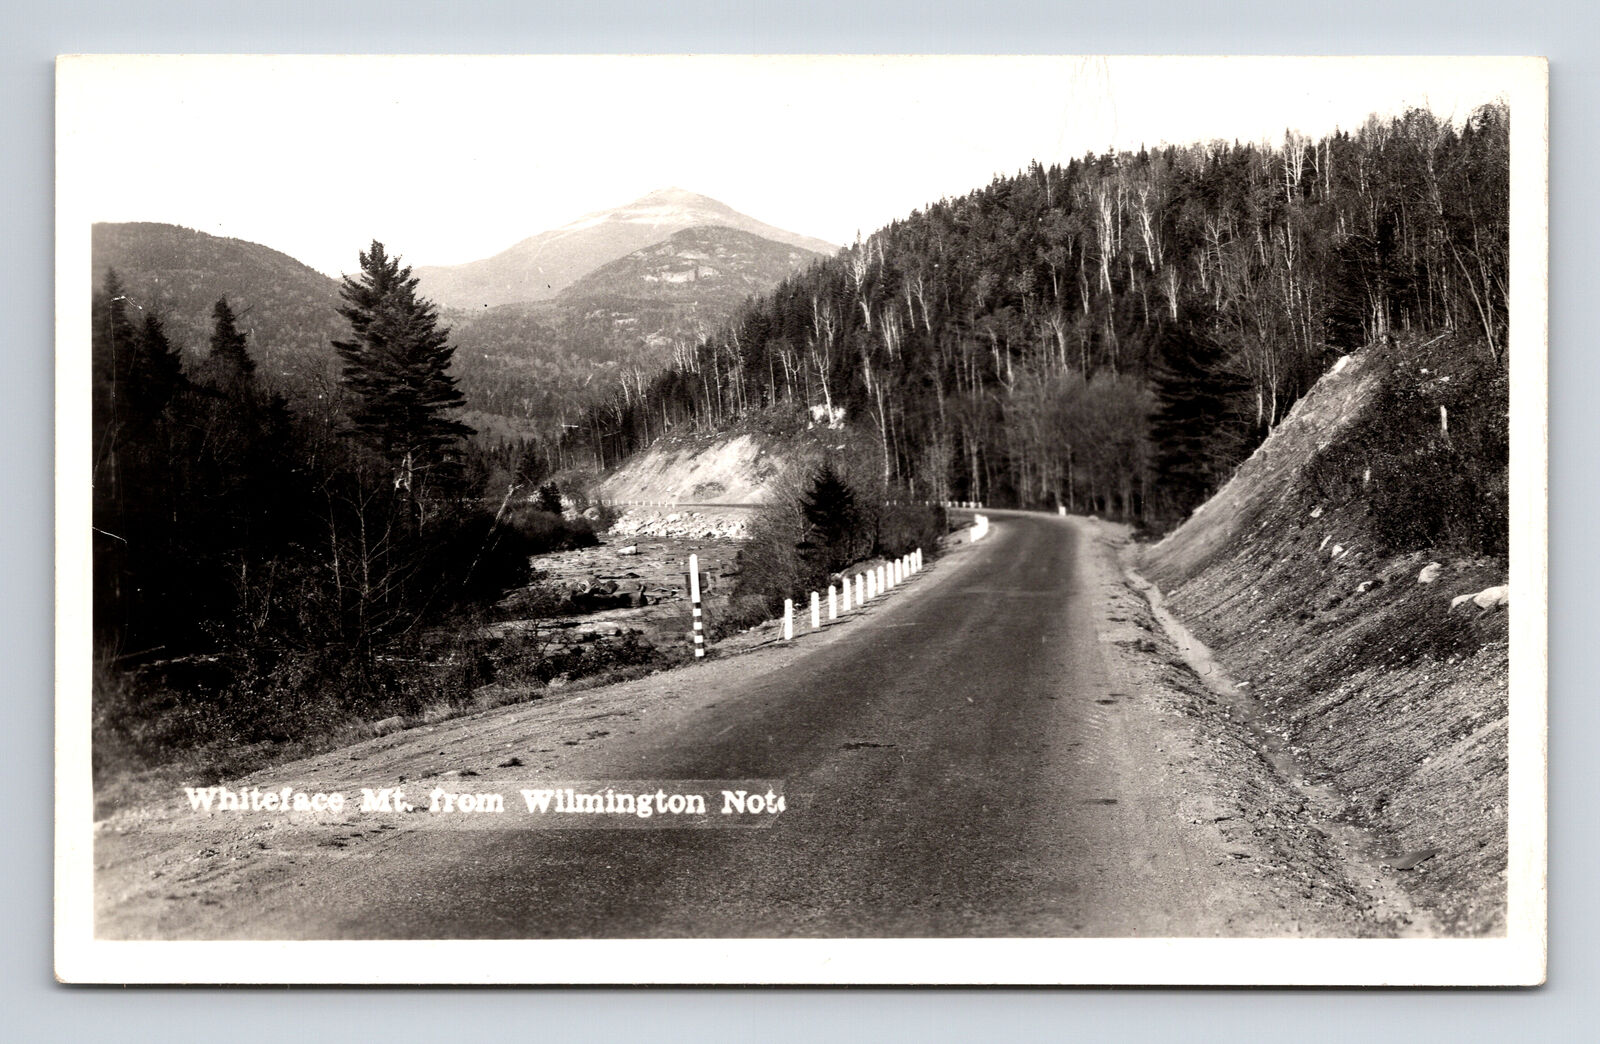 1948 RPPC Highway View Whiteface Mountain NY From Wilimington Notch Postcard